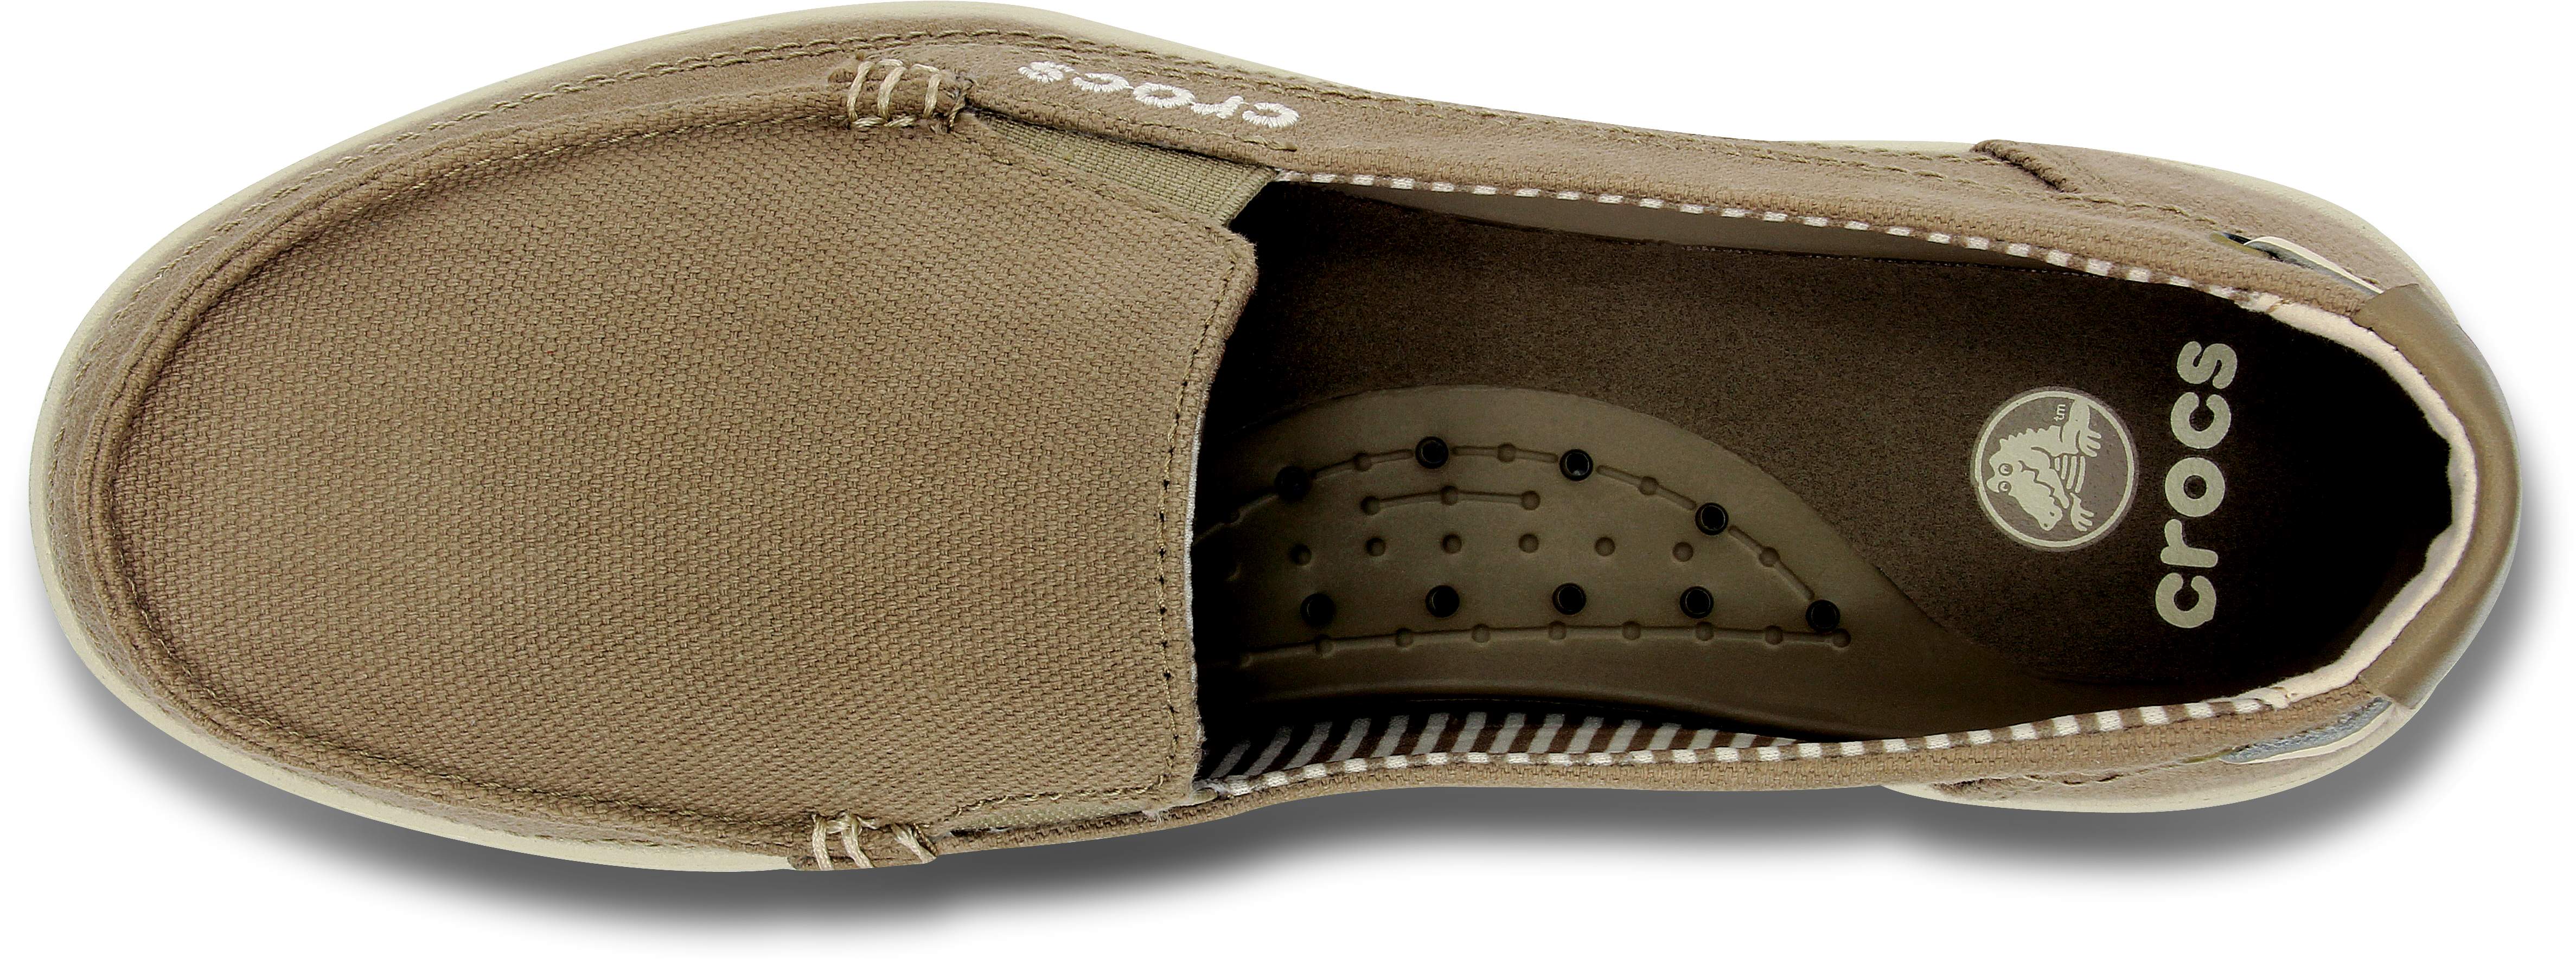 crocs canvas loafers